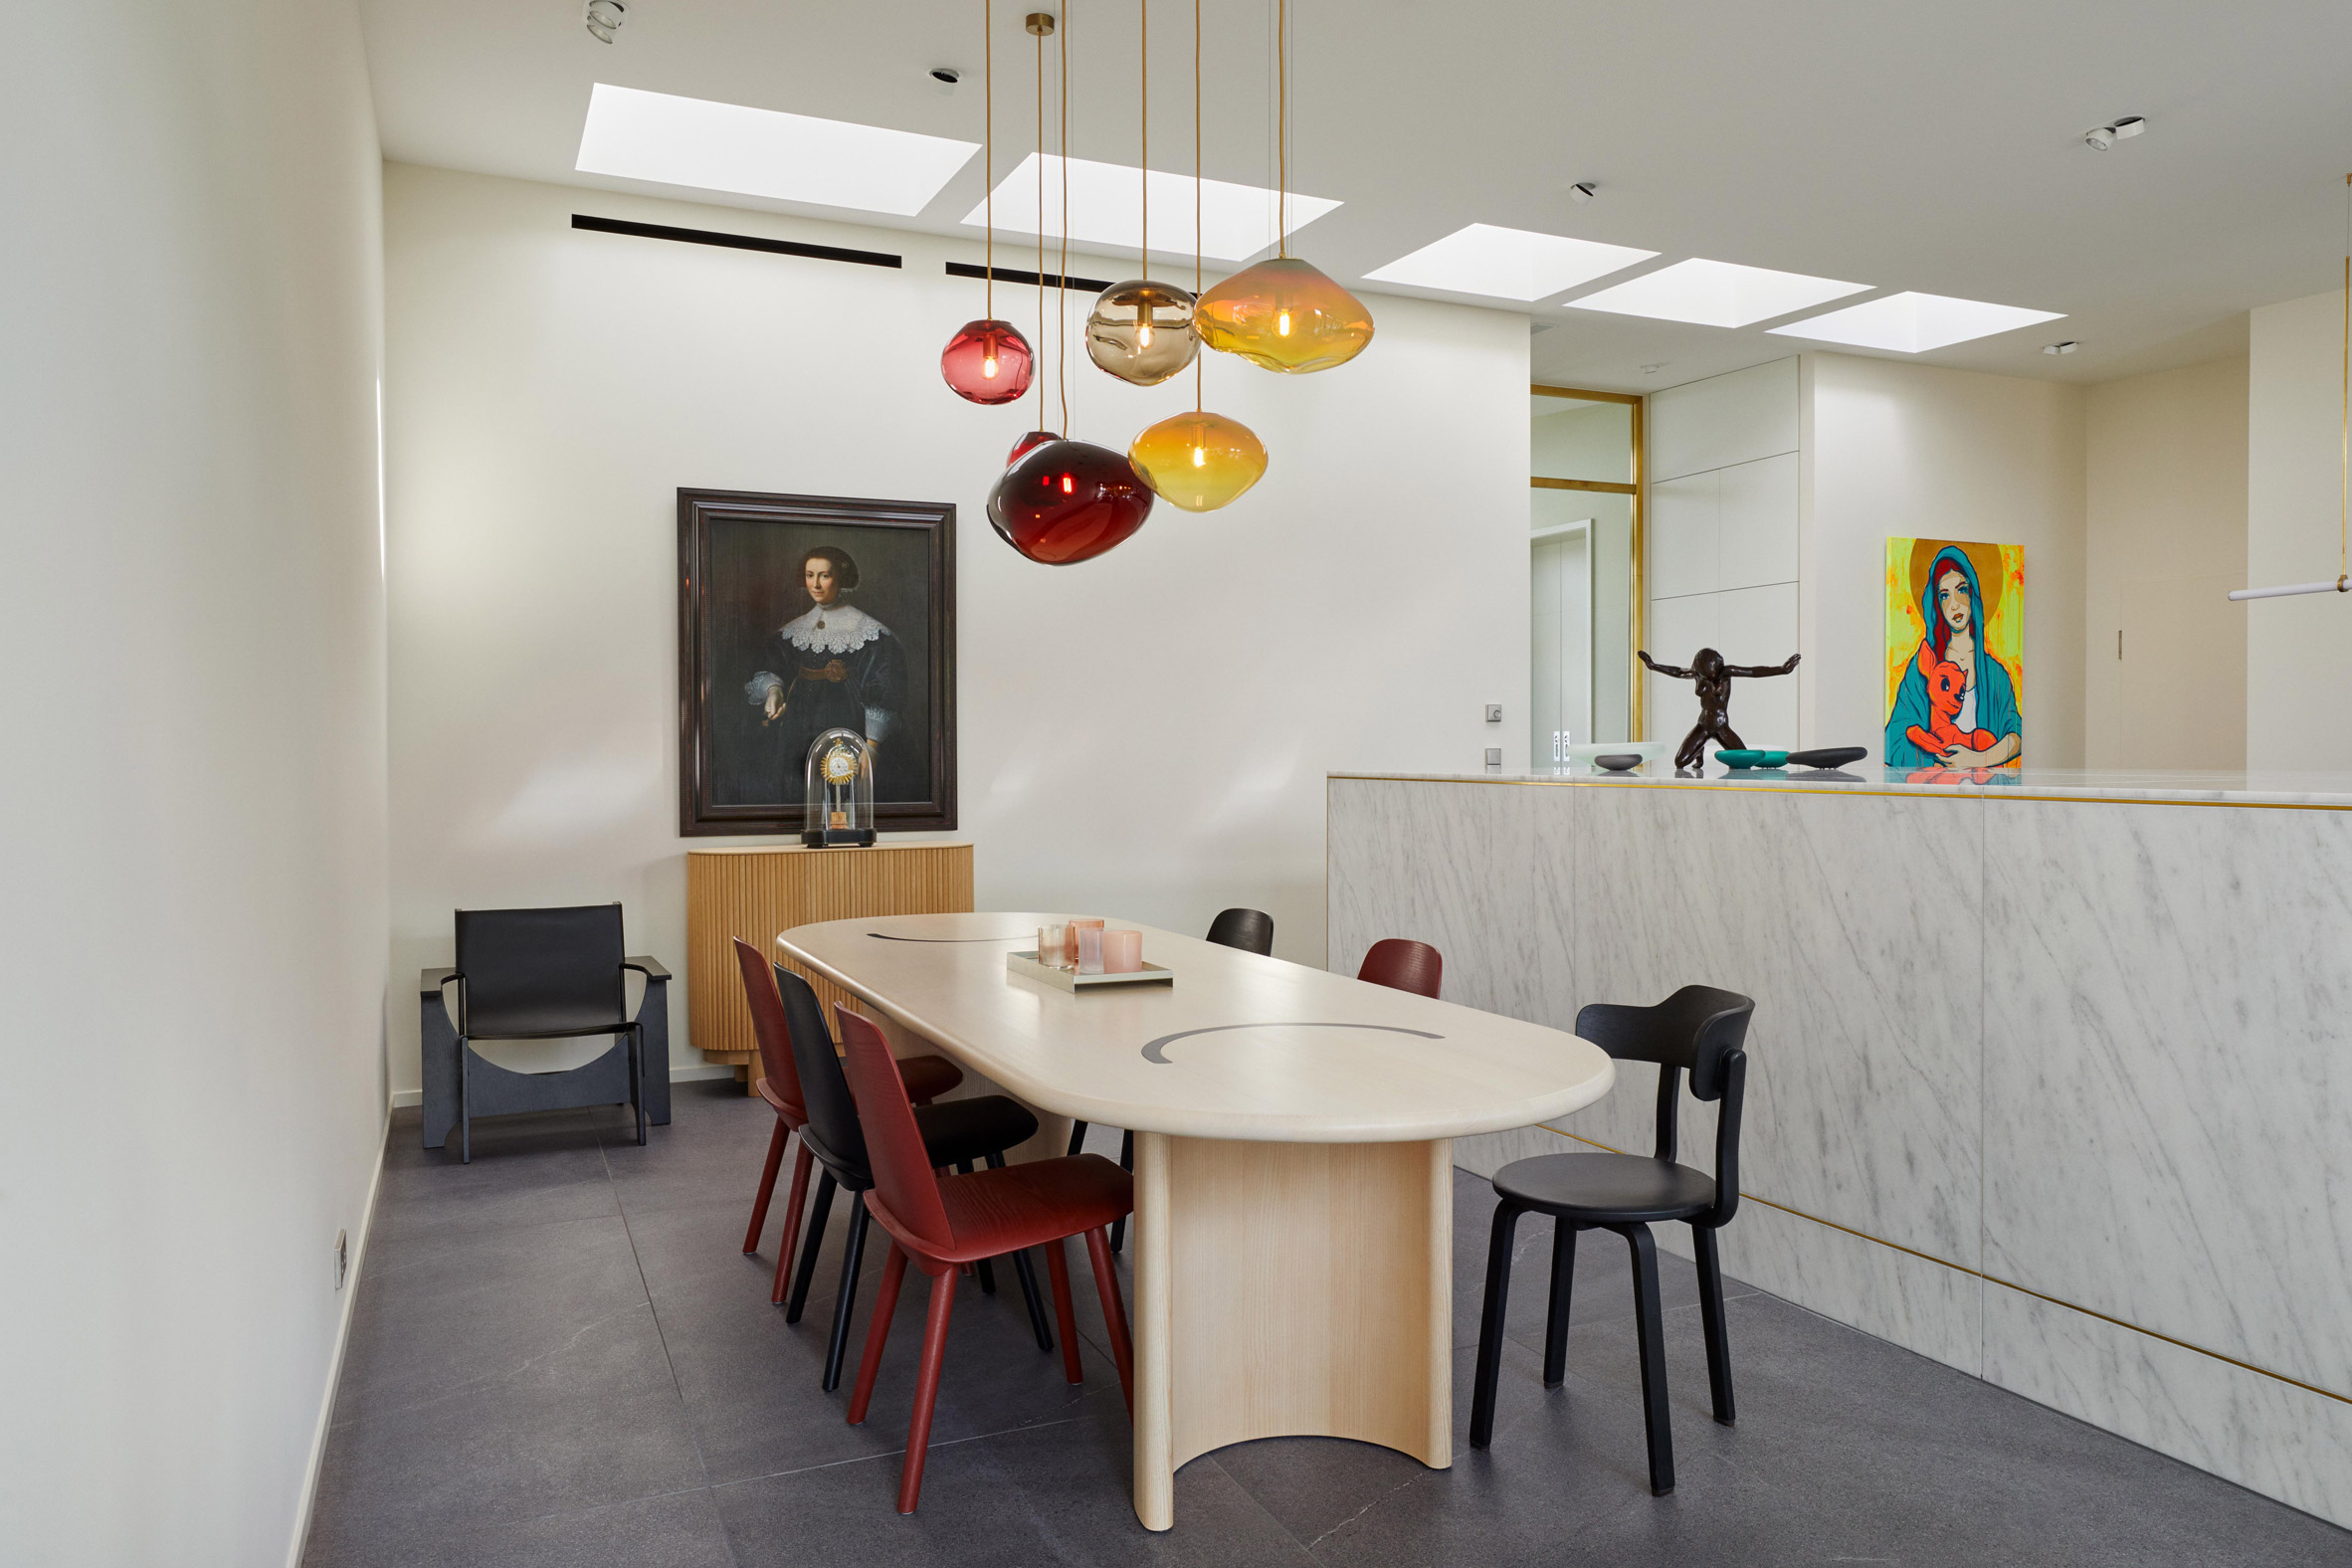 Dining area of Berlin penthouse designed by Coordination and Flip Sellin